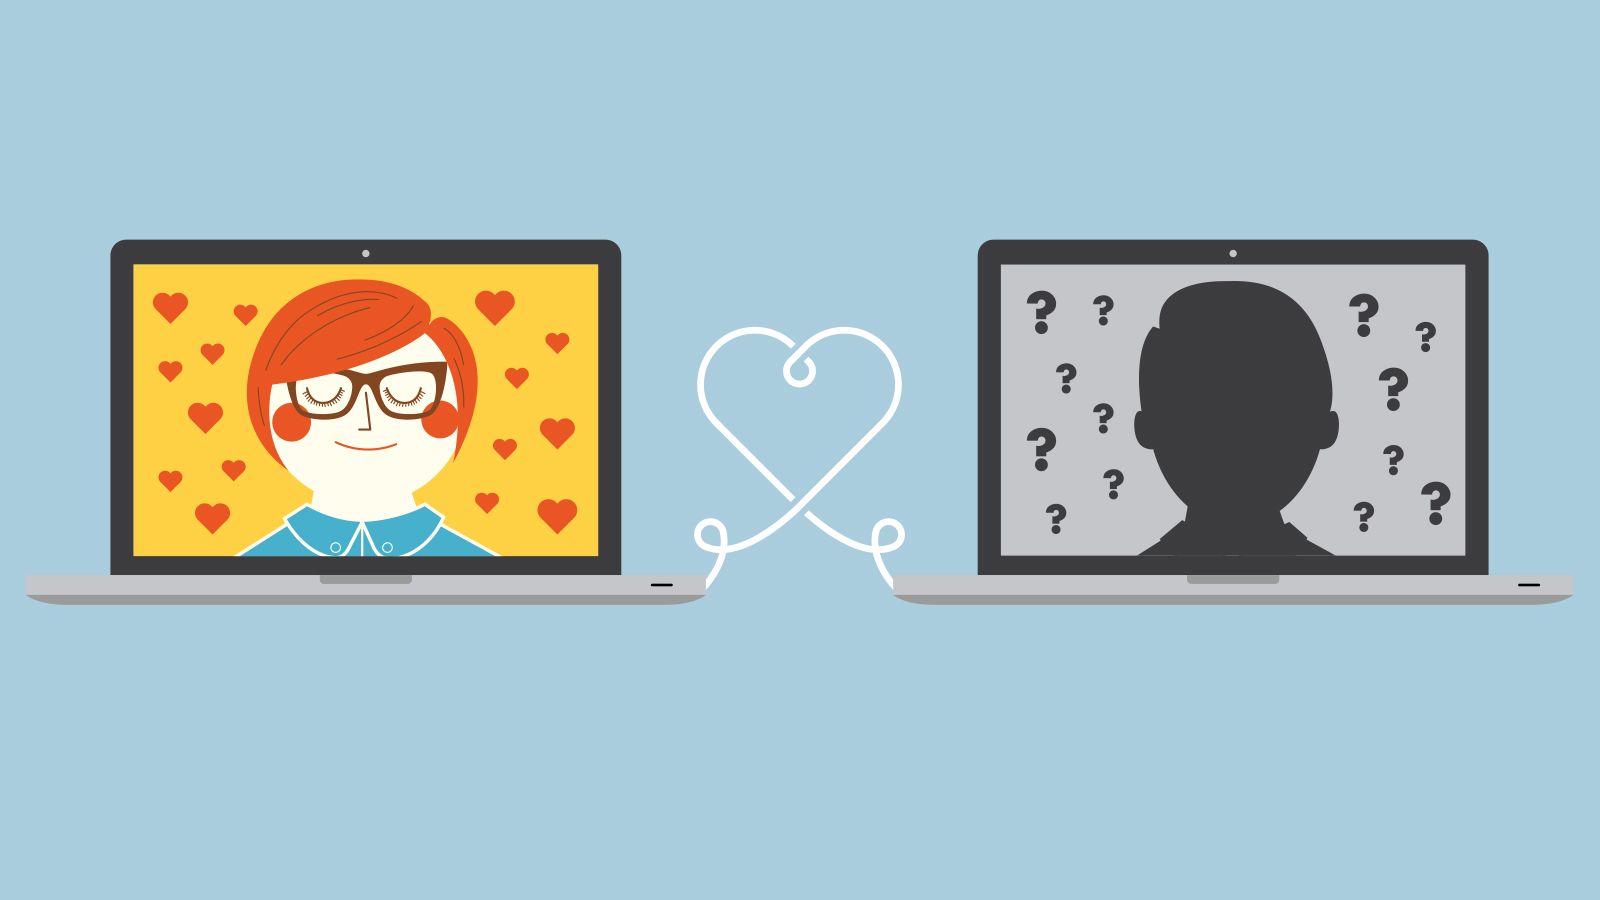 The upside of online dating: There's always a funny story to tell | CNN